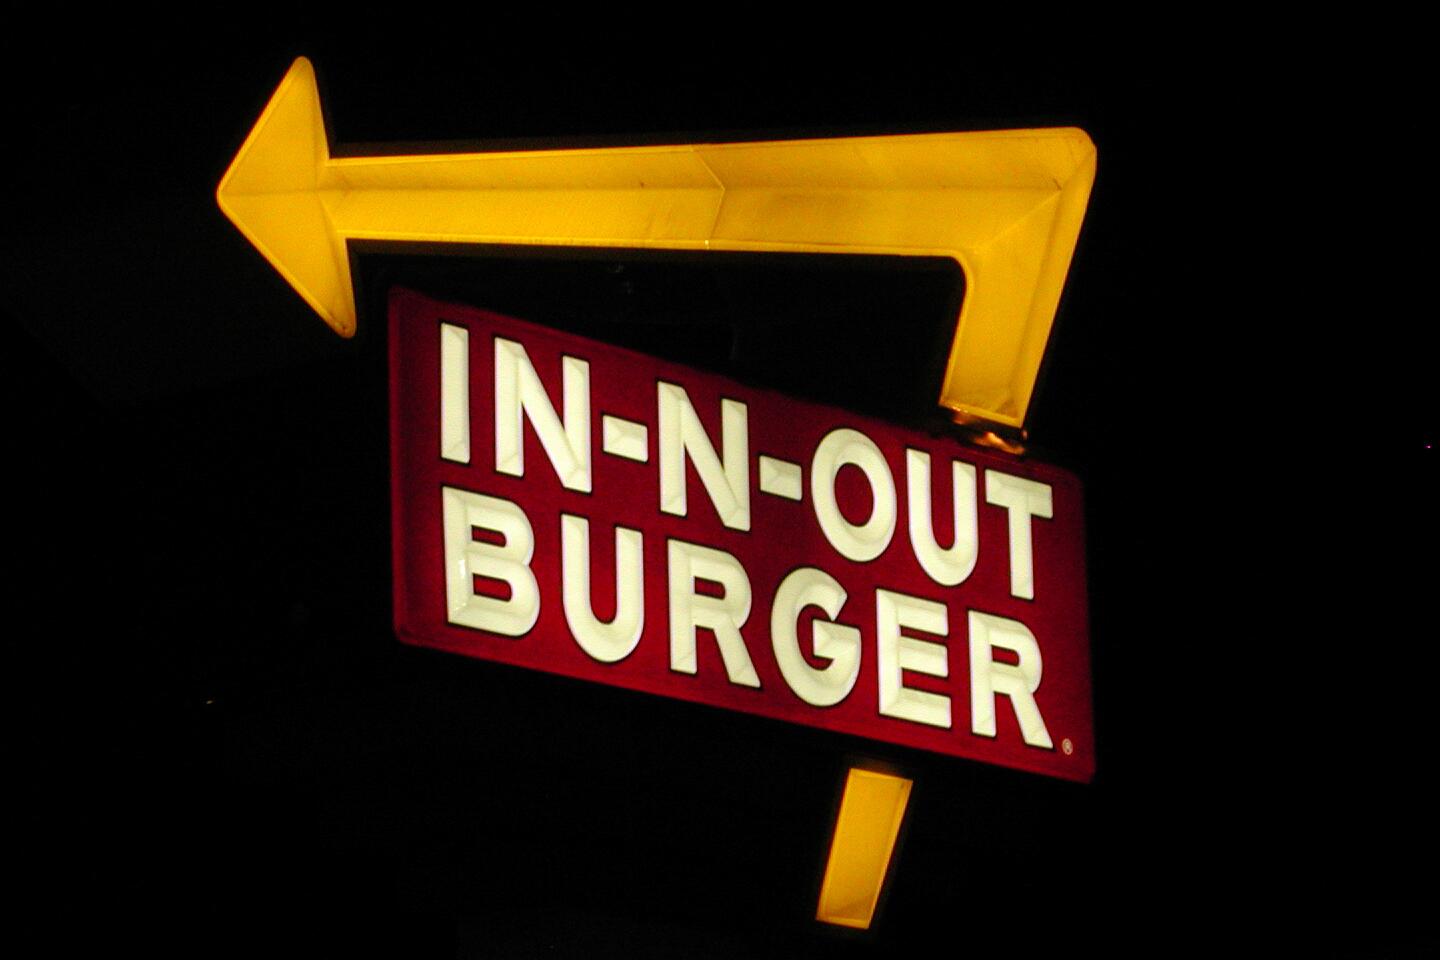 Anaheim cop accused of raping woman after tracking her from an In-N-Out